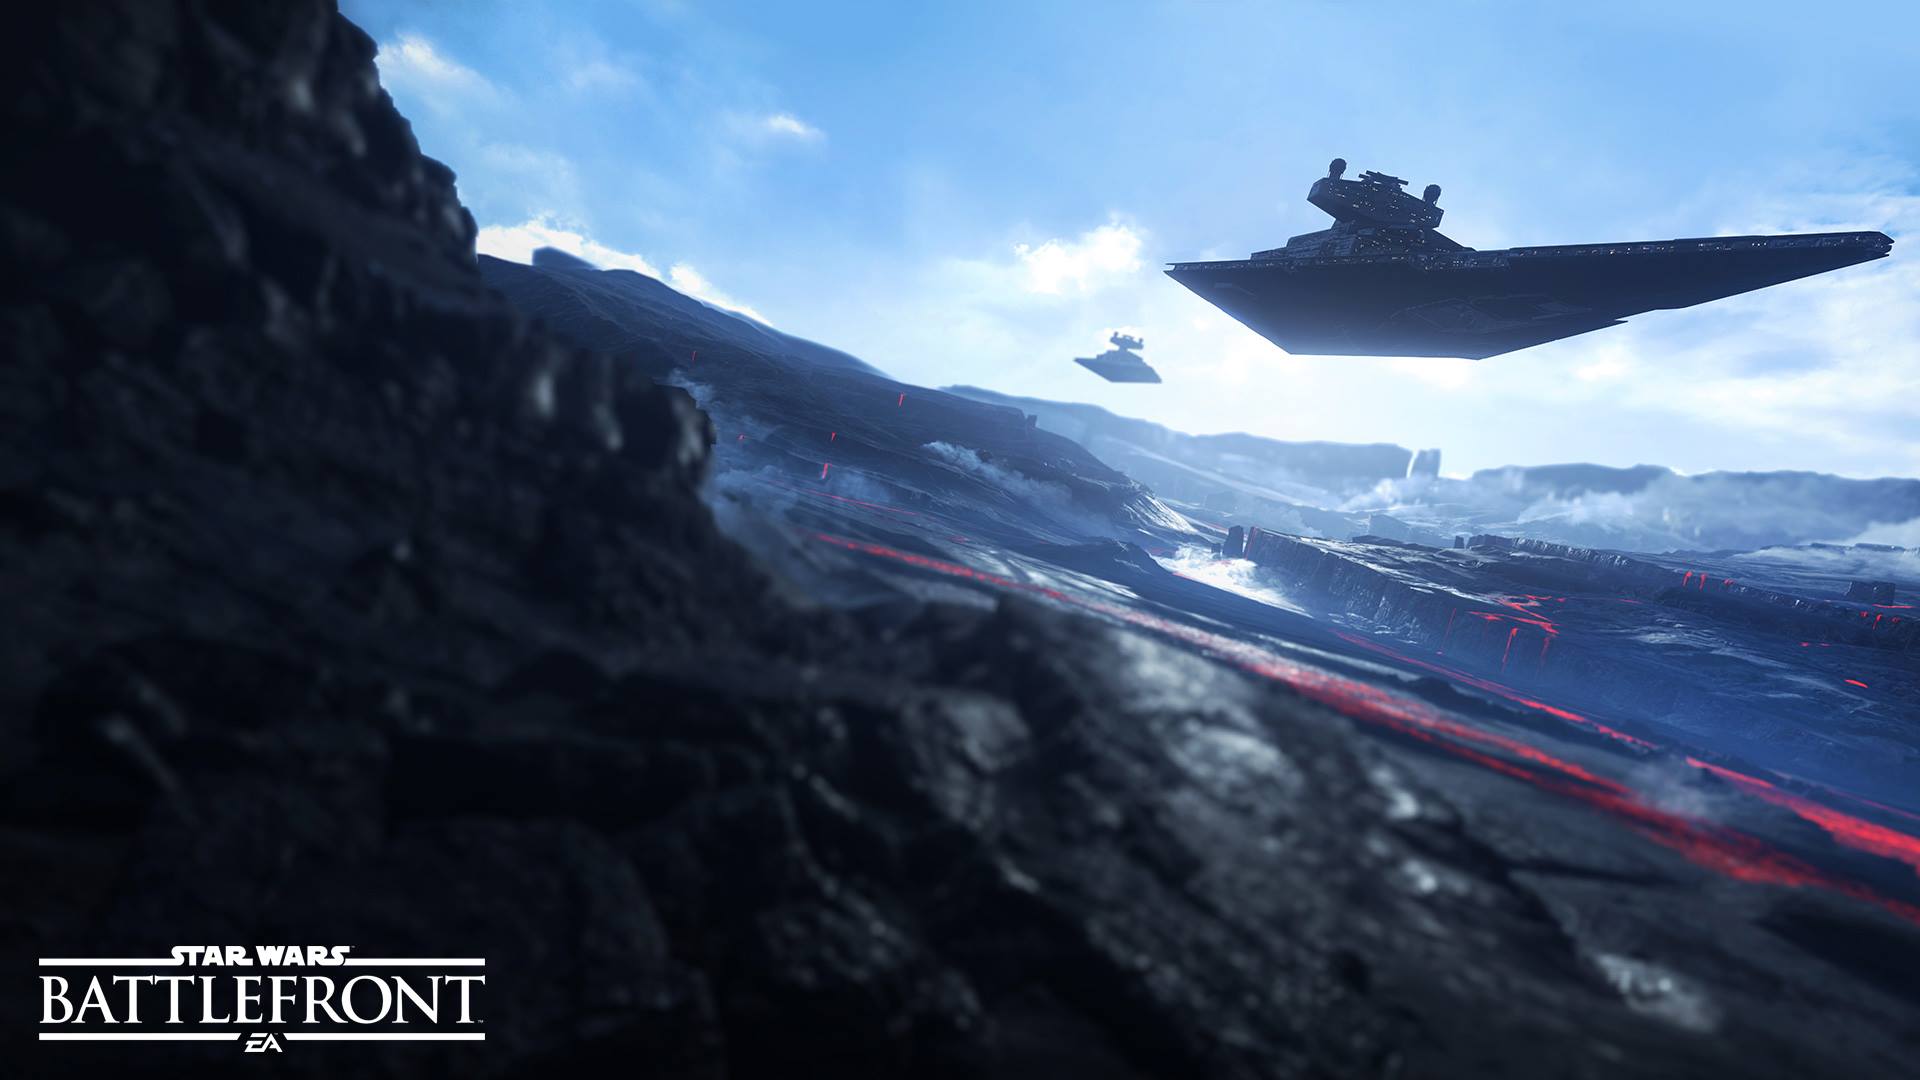 Here Are Some Glorious Star Wars Battlefront HD Wallpapers - GameSpot